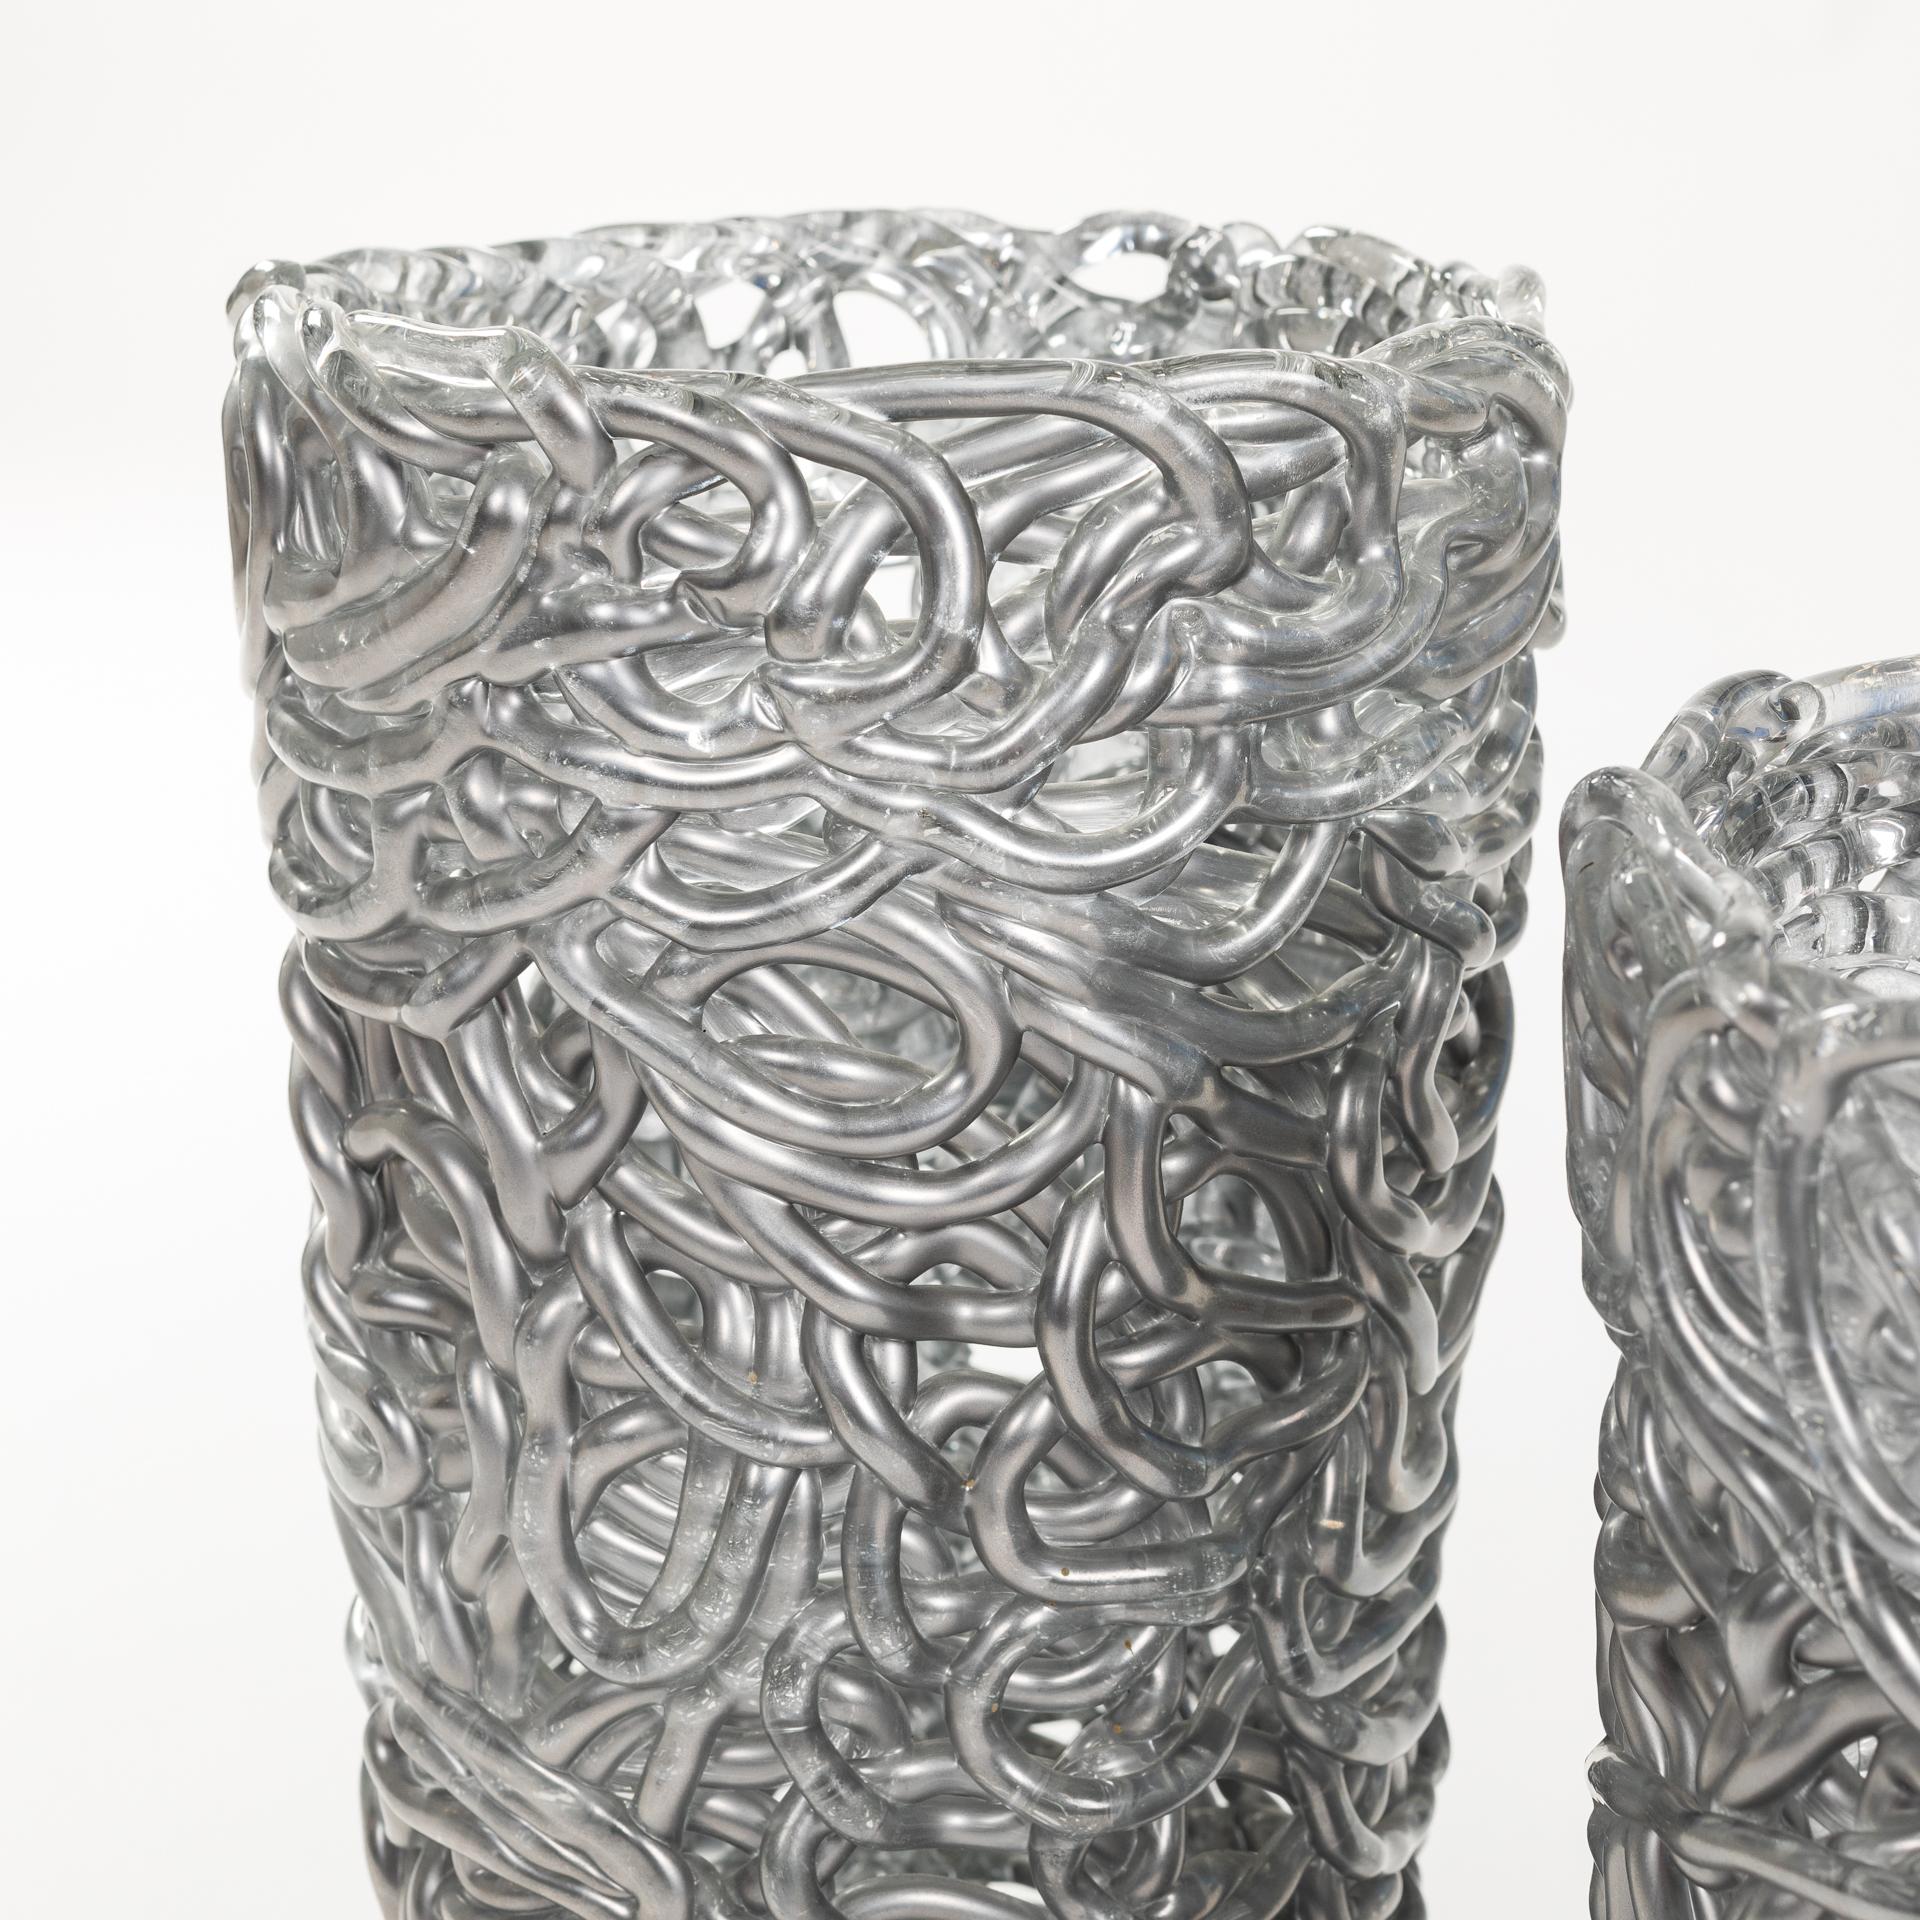 Pair of Midcentury Silver-Colored Murano Glass Vases out of Glass Veins In Good Condition For Sale In Salzburg, AT